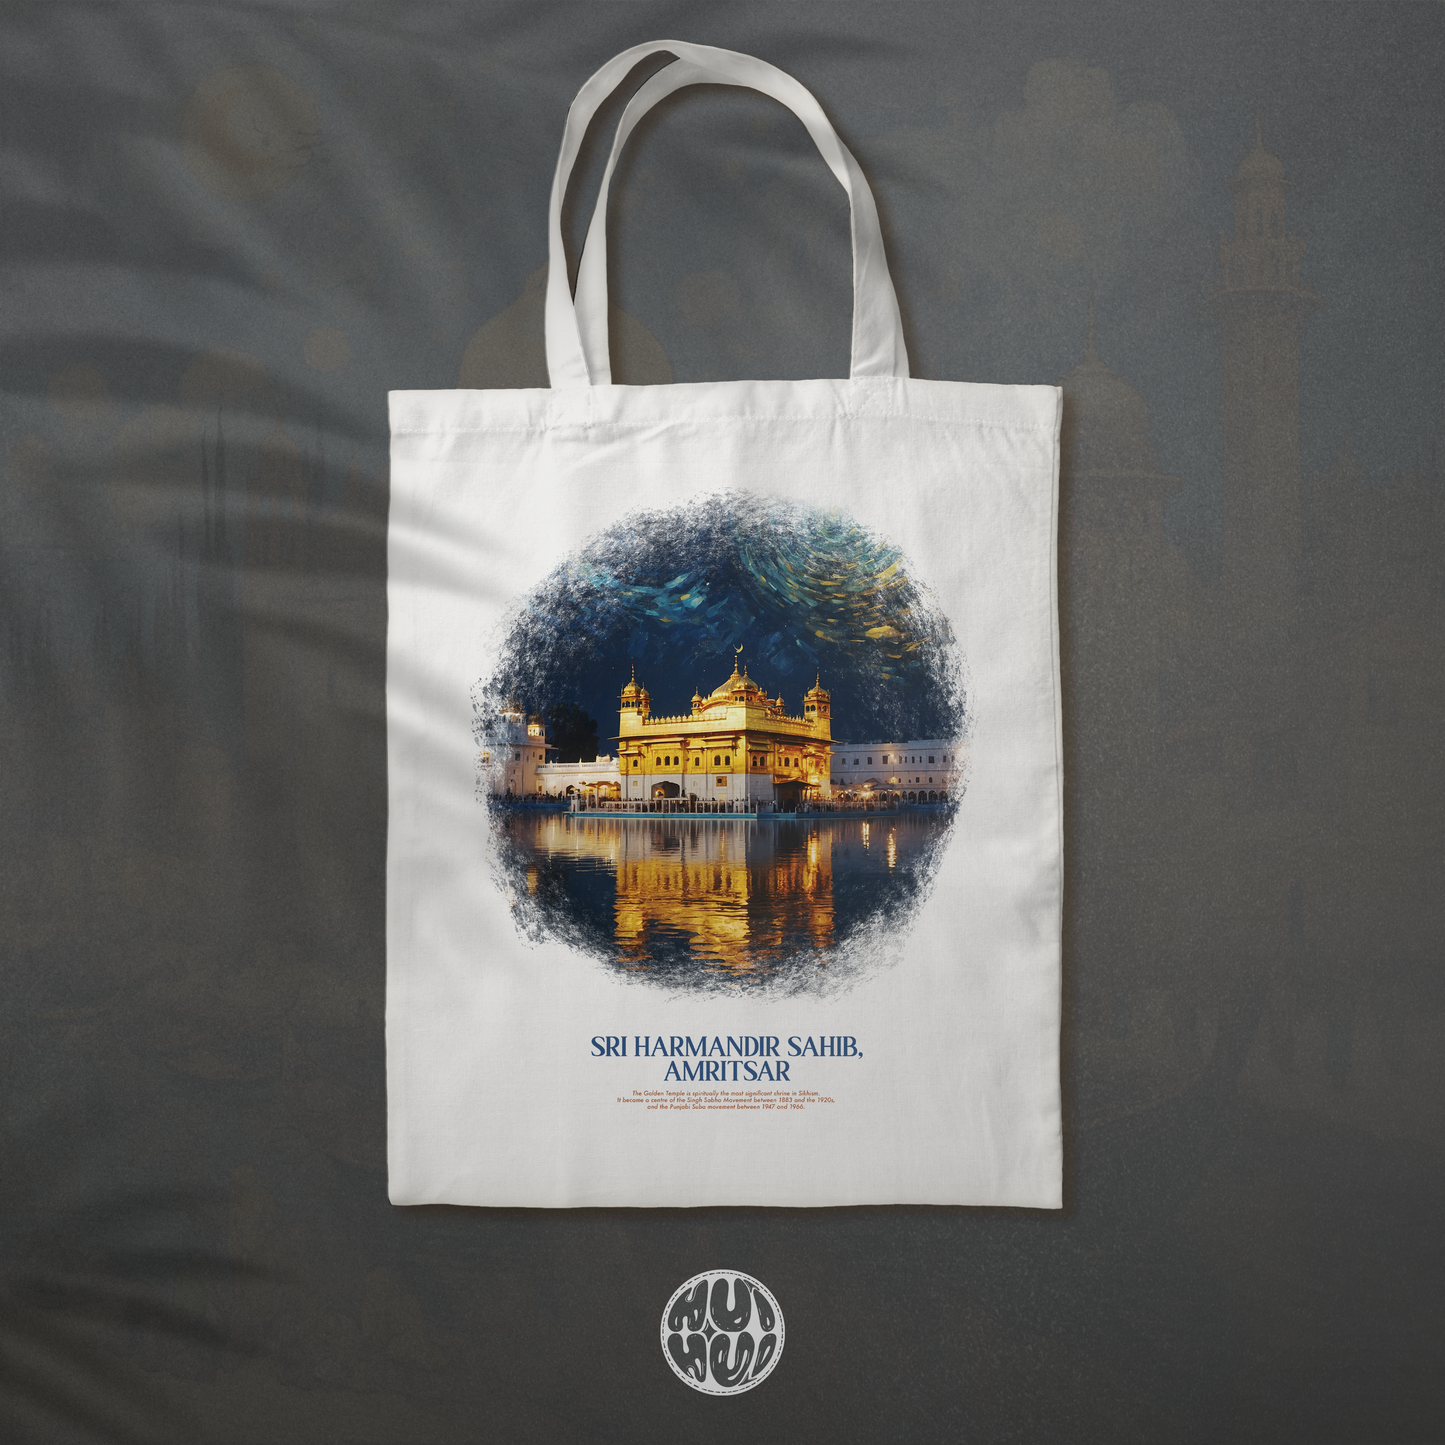 The Golden Temple in starry night (Totebag) by huihui